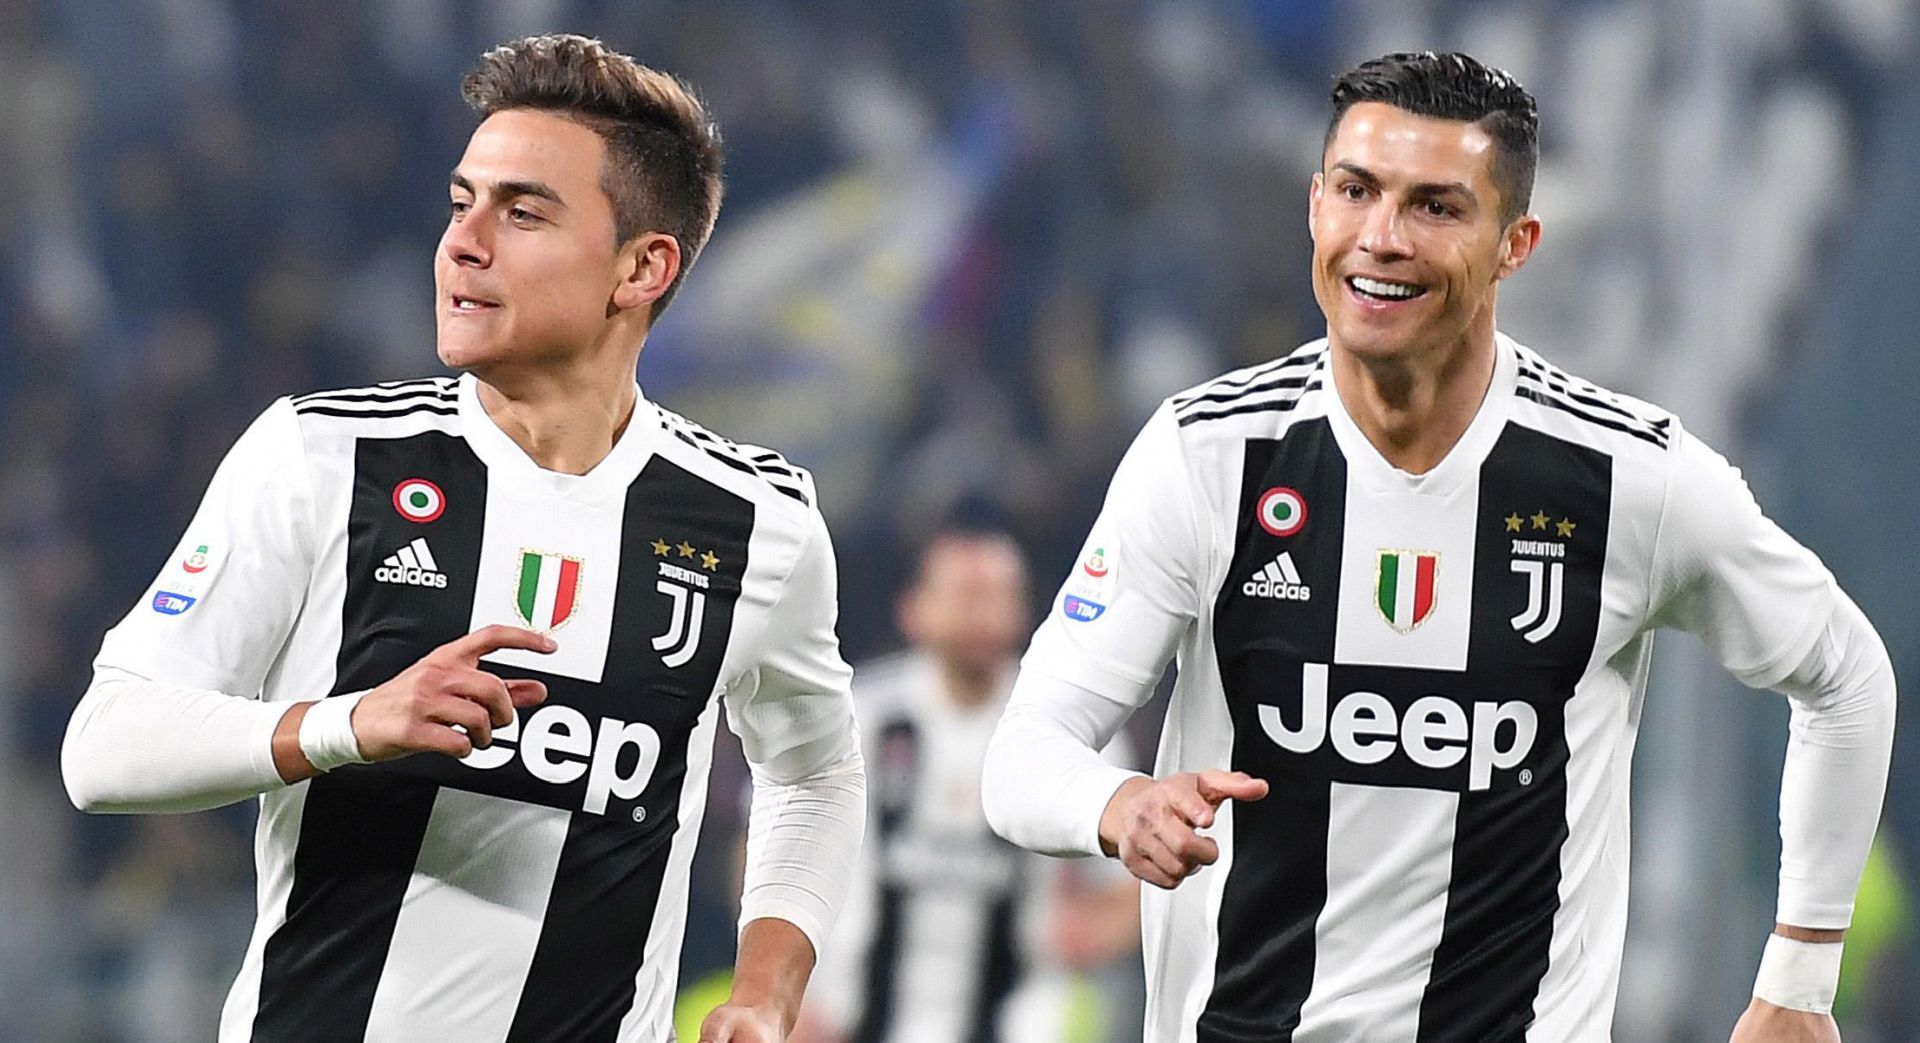 epa07373454 Juventus's forward Paulo Dybala (L) jubilates with his teammate Cristiano Ronaldo after scoring the 1-0 lead during the Italian Serie A soccer match Juventus FC vs Frosinone at the Allianz stadium in Turin, Italy, 15 February 2019.  EPA/ALESSANDRO DI MARCO